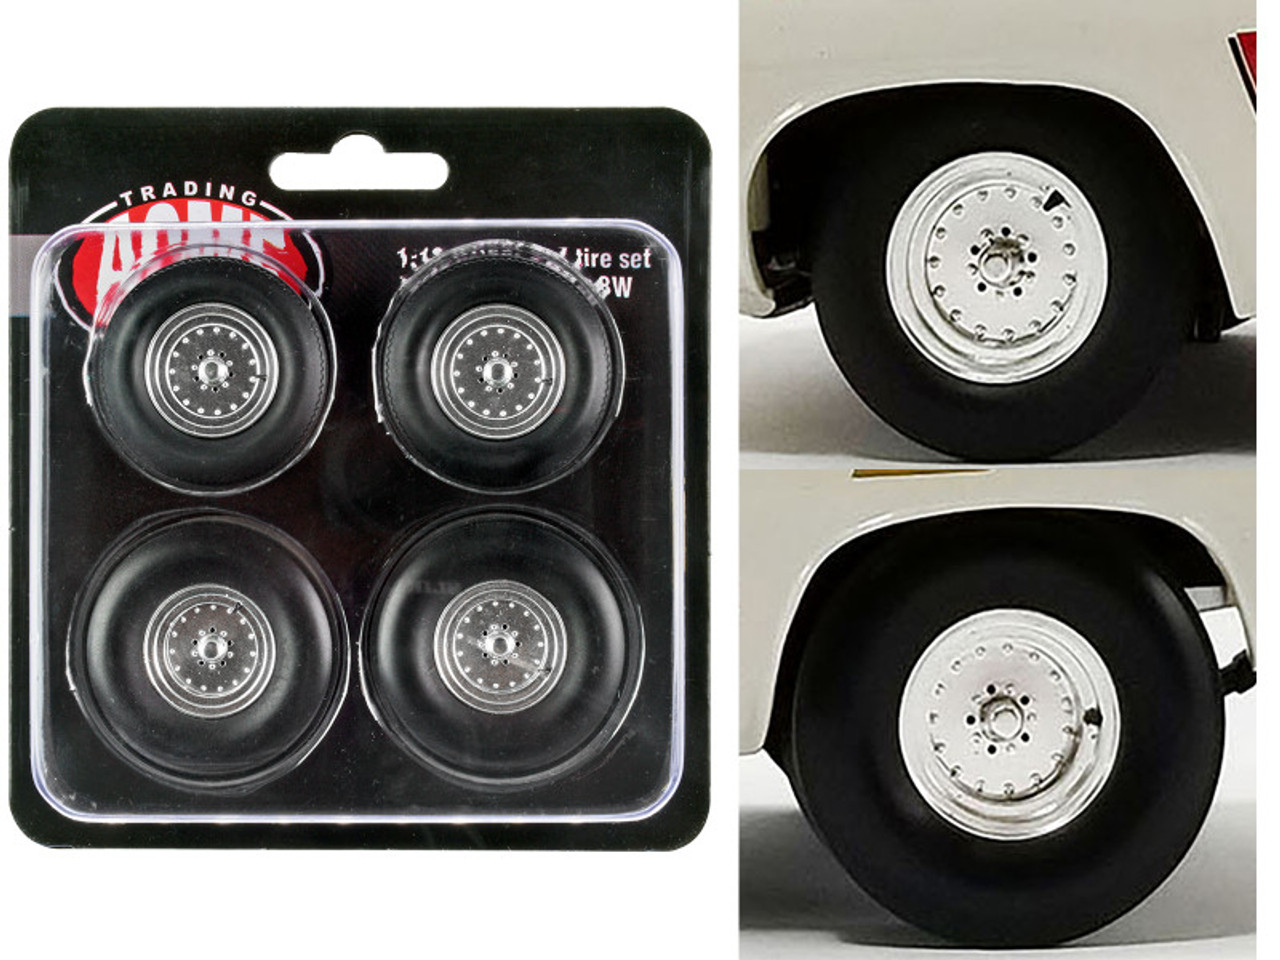 Draglite Drag Wheels and Tires Set of 4 pieces from "1970 Plymouth HEMI Barracuda Super Stock Ramchargers" for 1/18 Scale Models by ACME